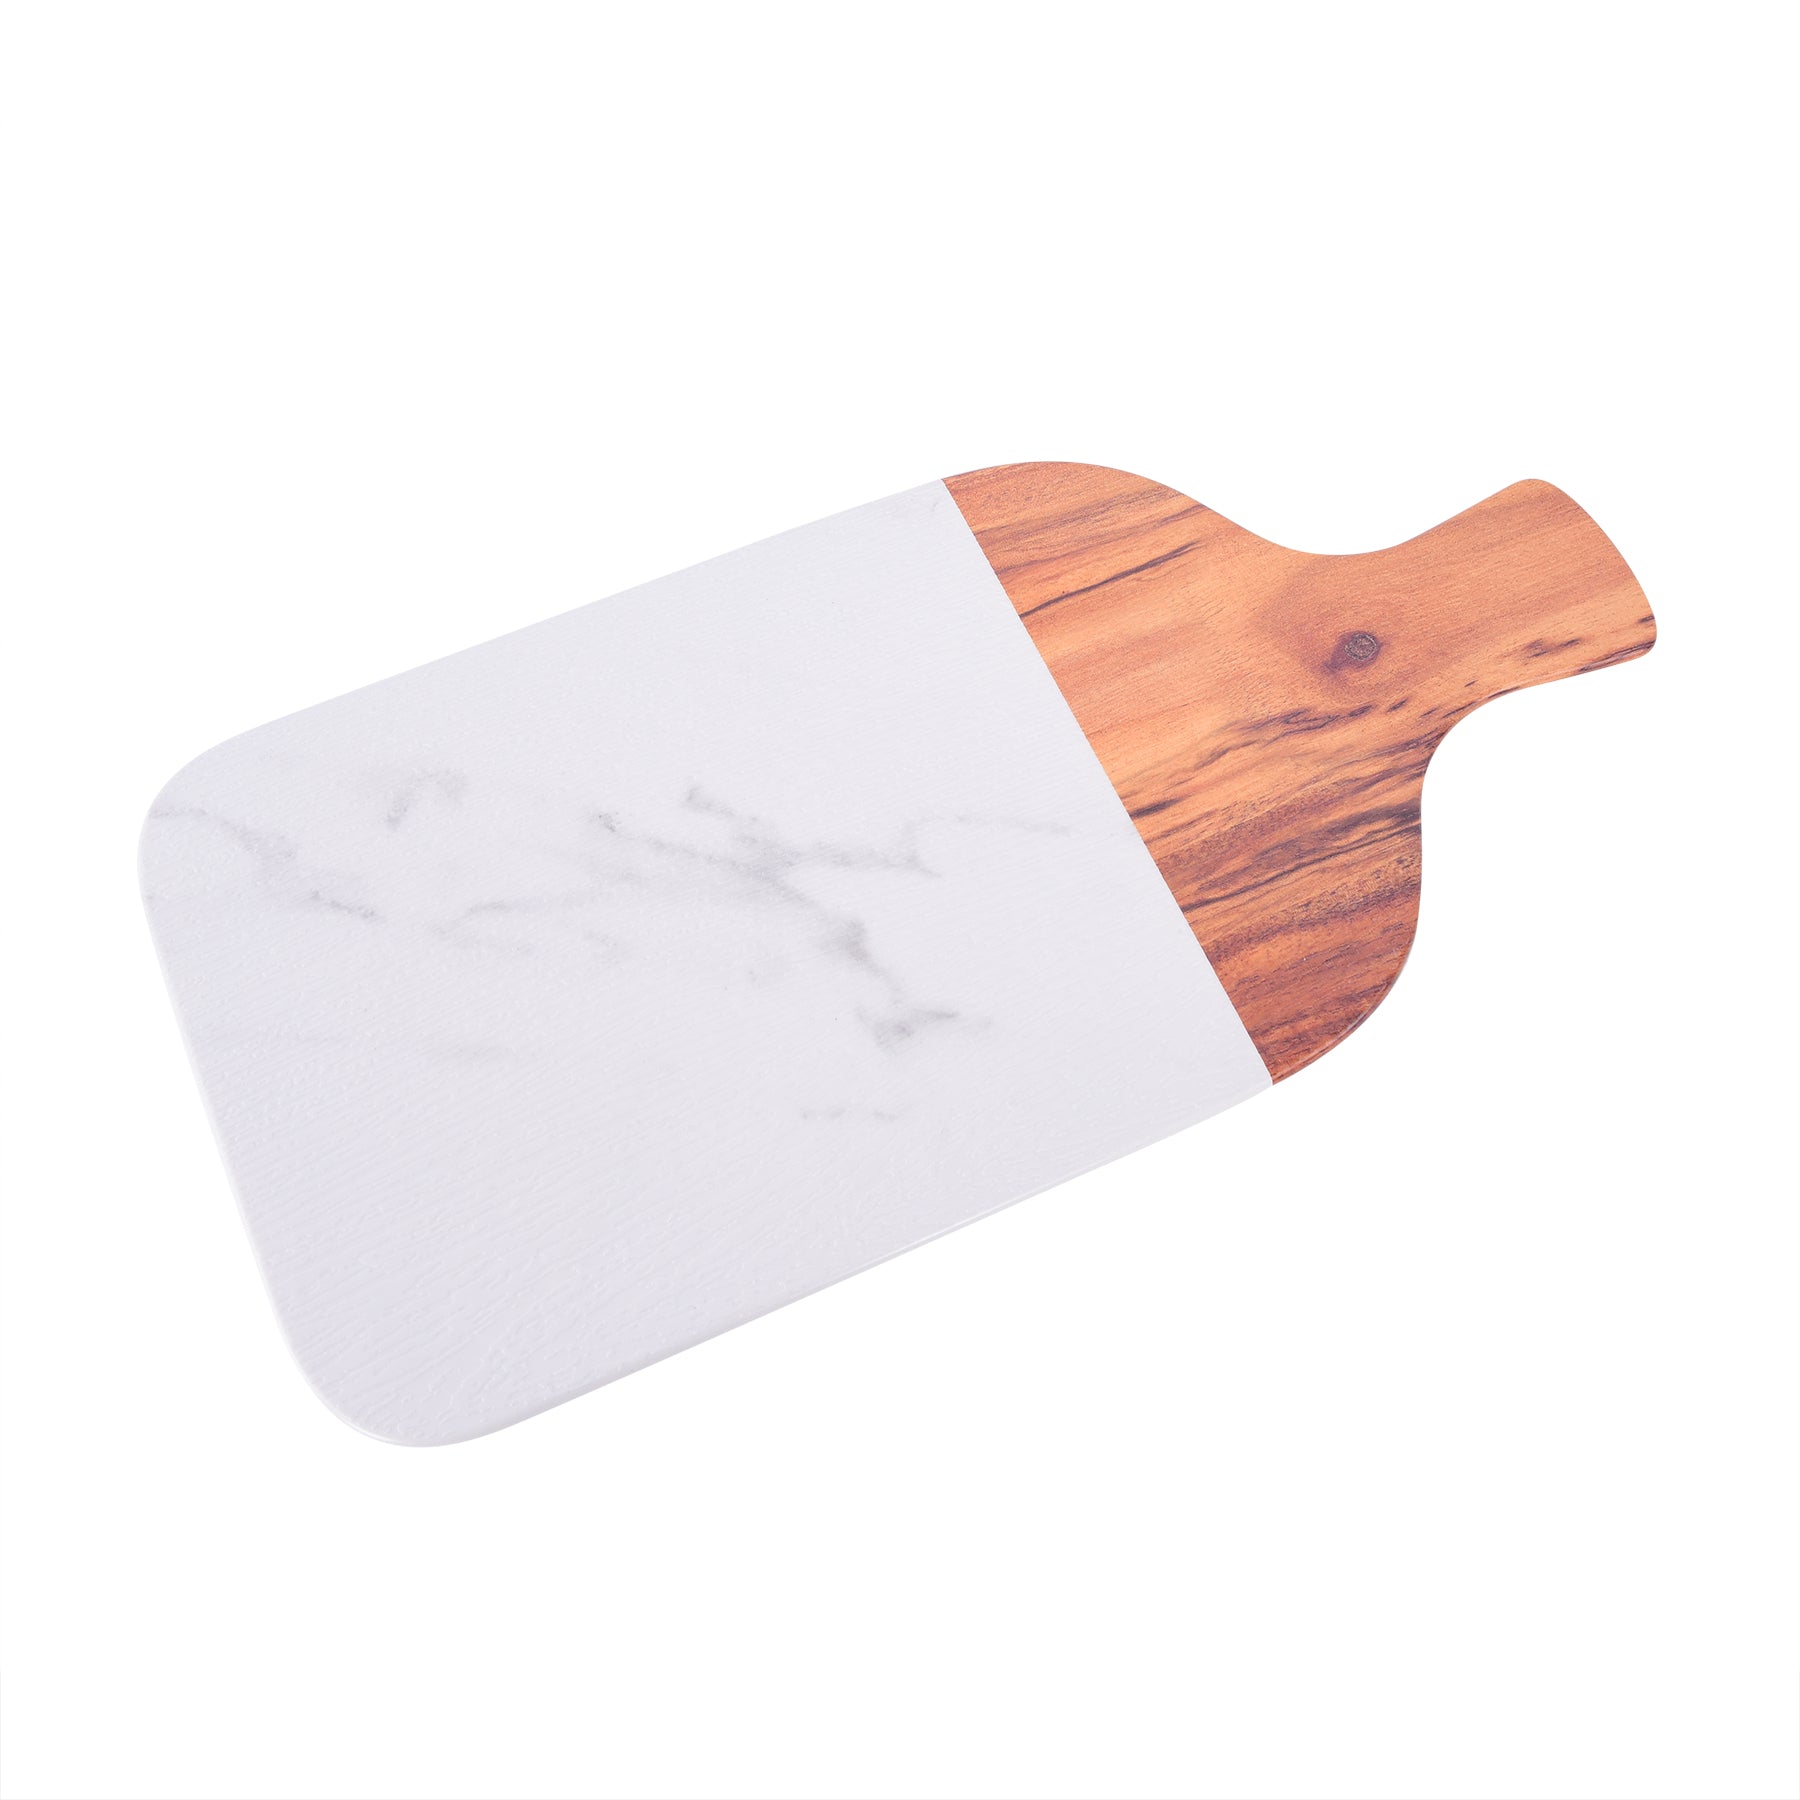 Food Board with handle - Marble & Brown